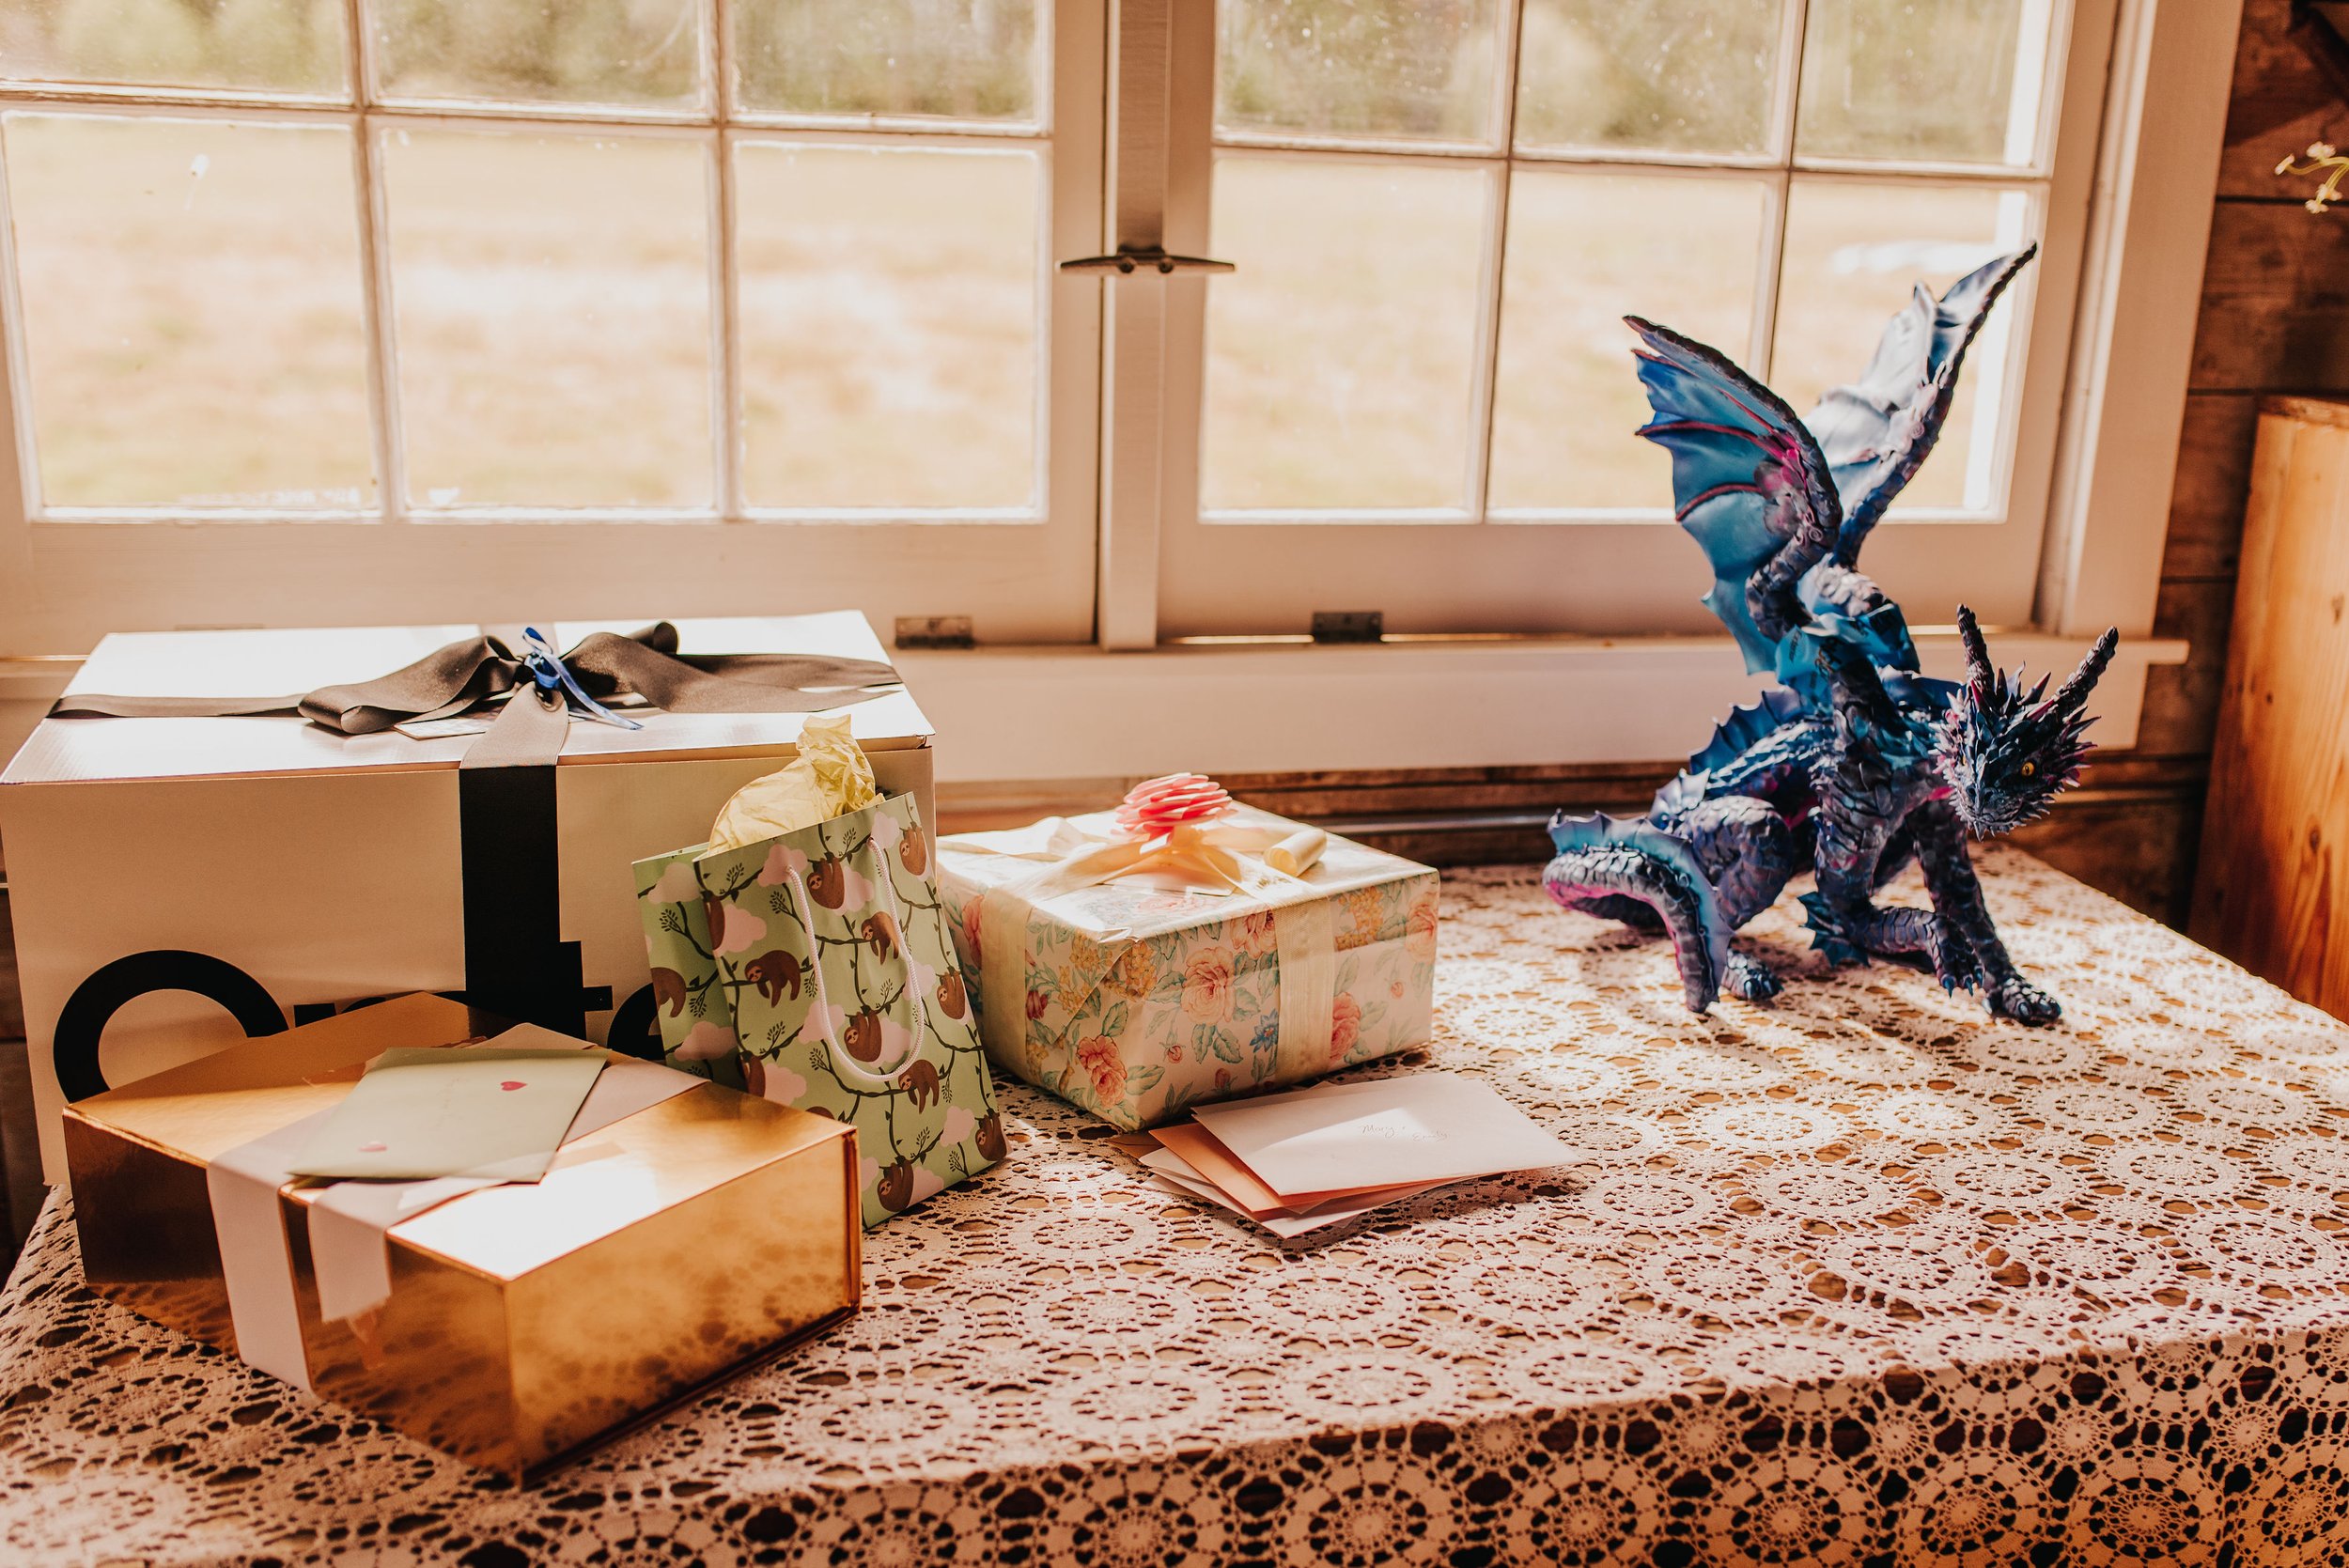  A gift table with a lace tablecloth also features a blue dragon sculpture. 